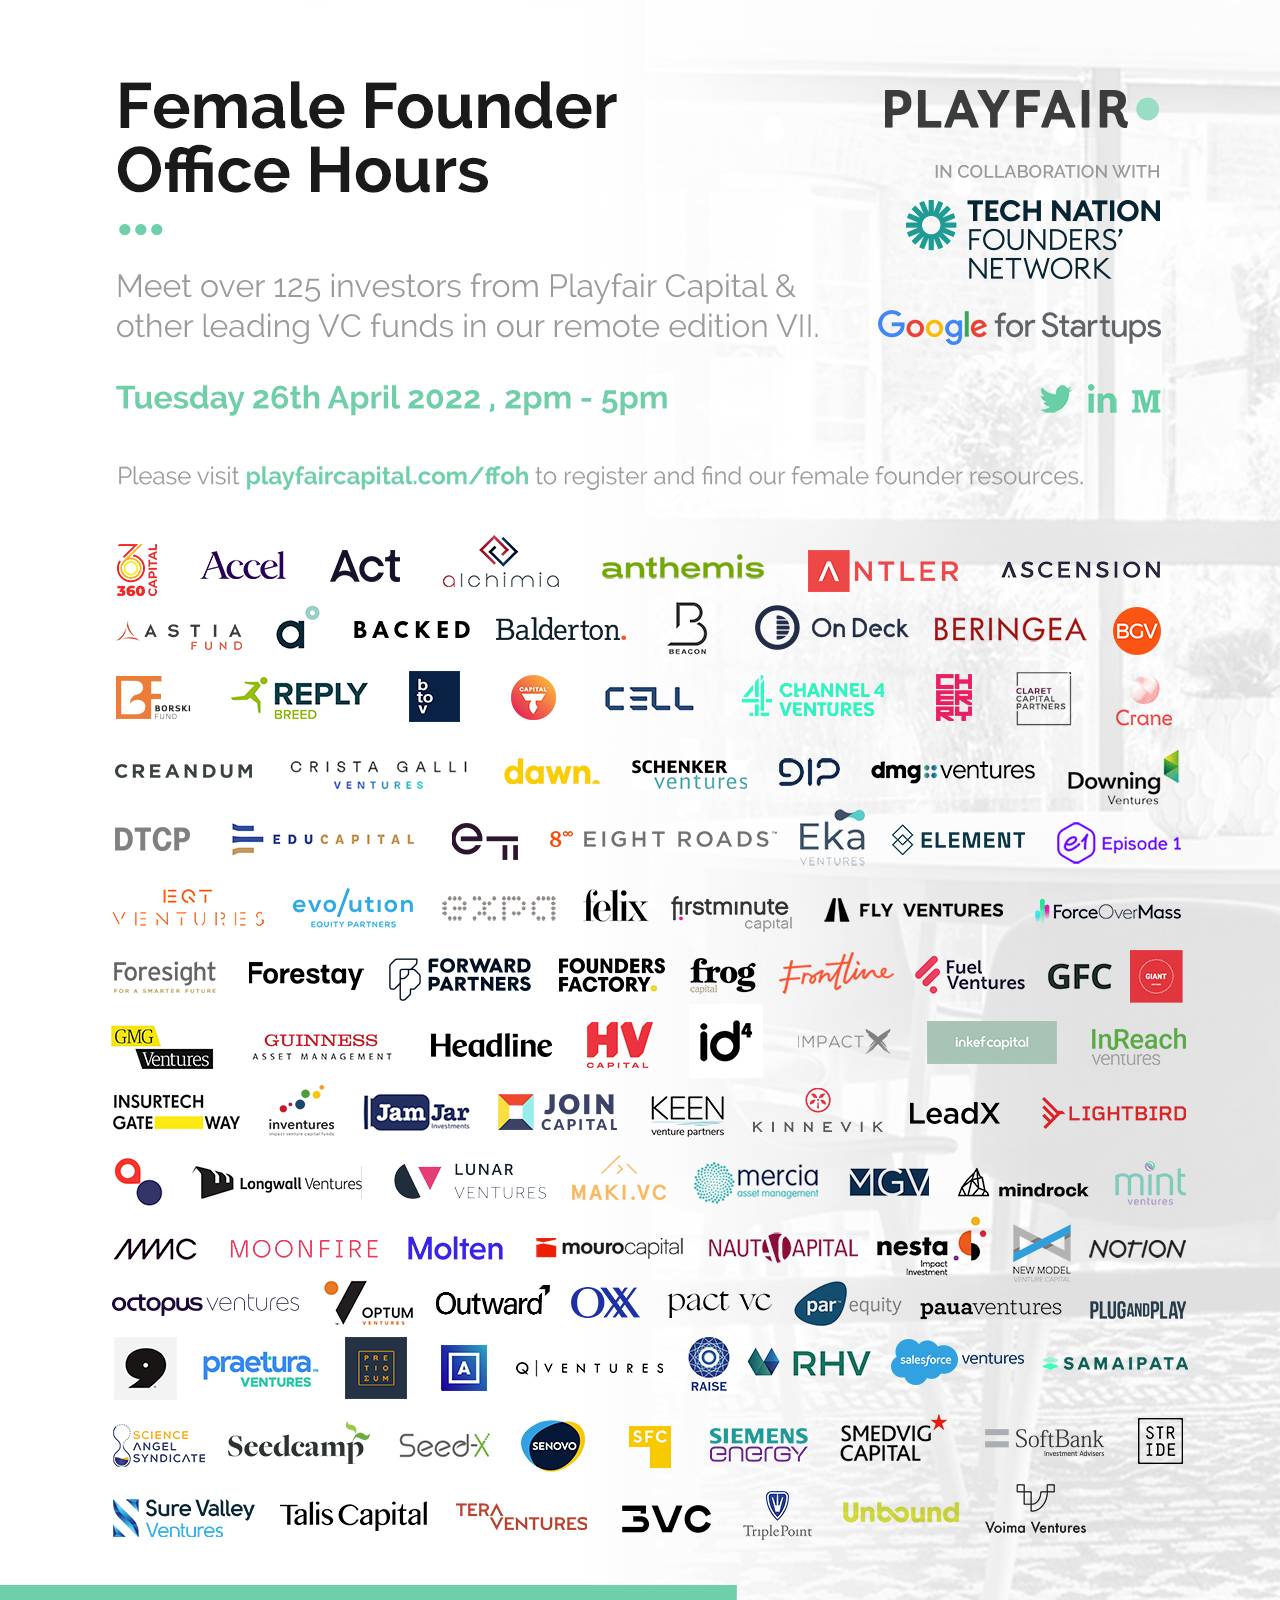 Playfair Capital, Tech Nation, and Google for Startups announce Edition VII of Europe-wide Female Founder Office Hours